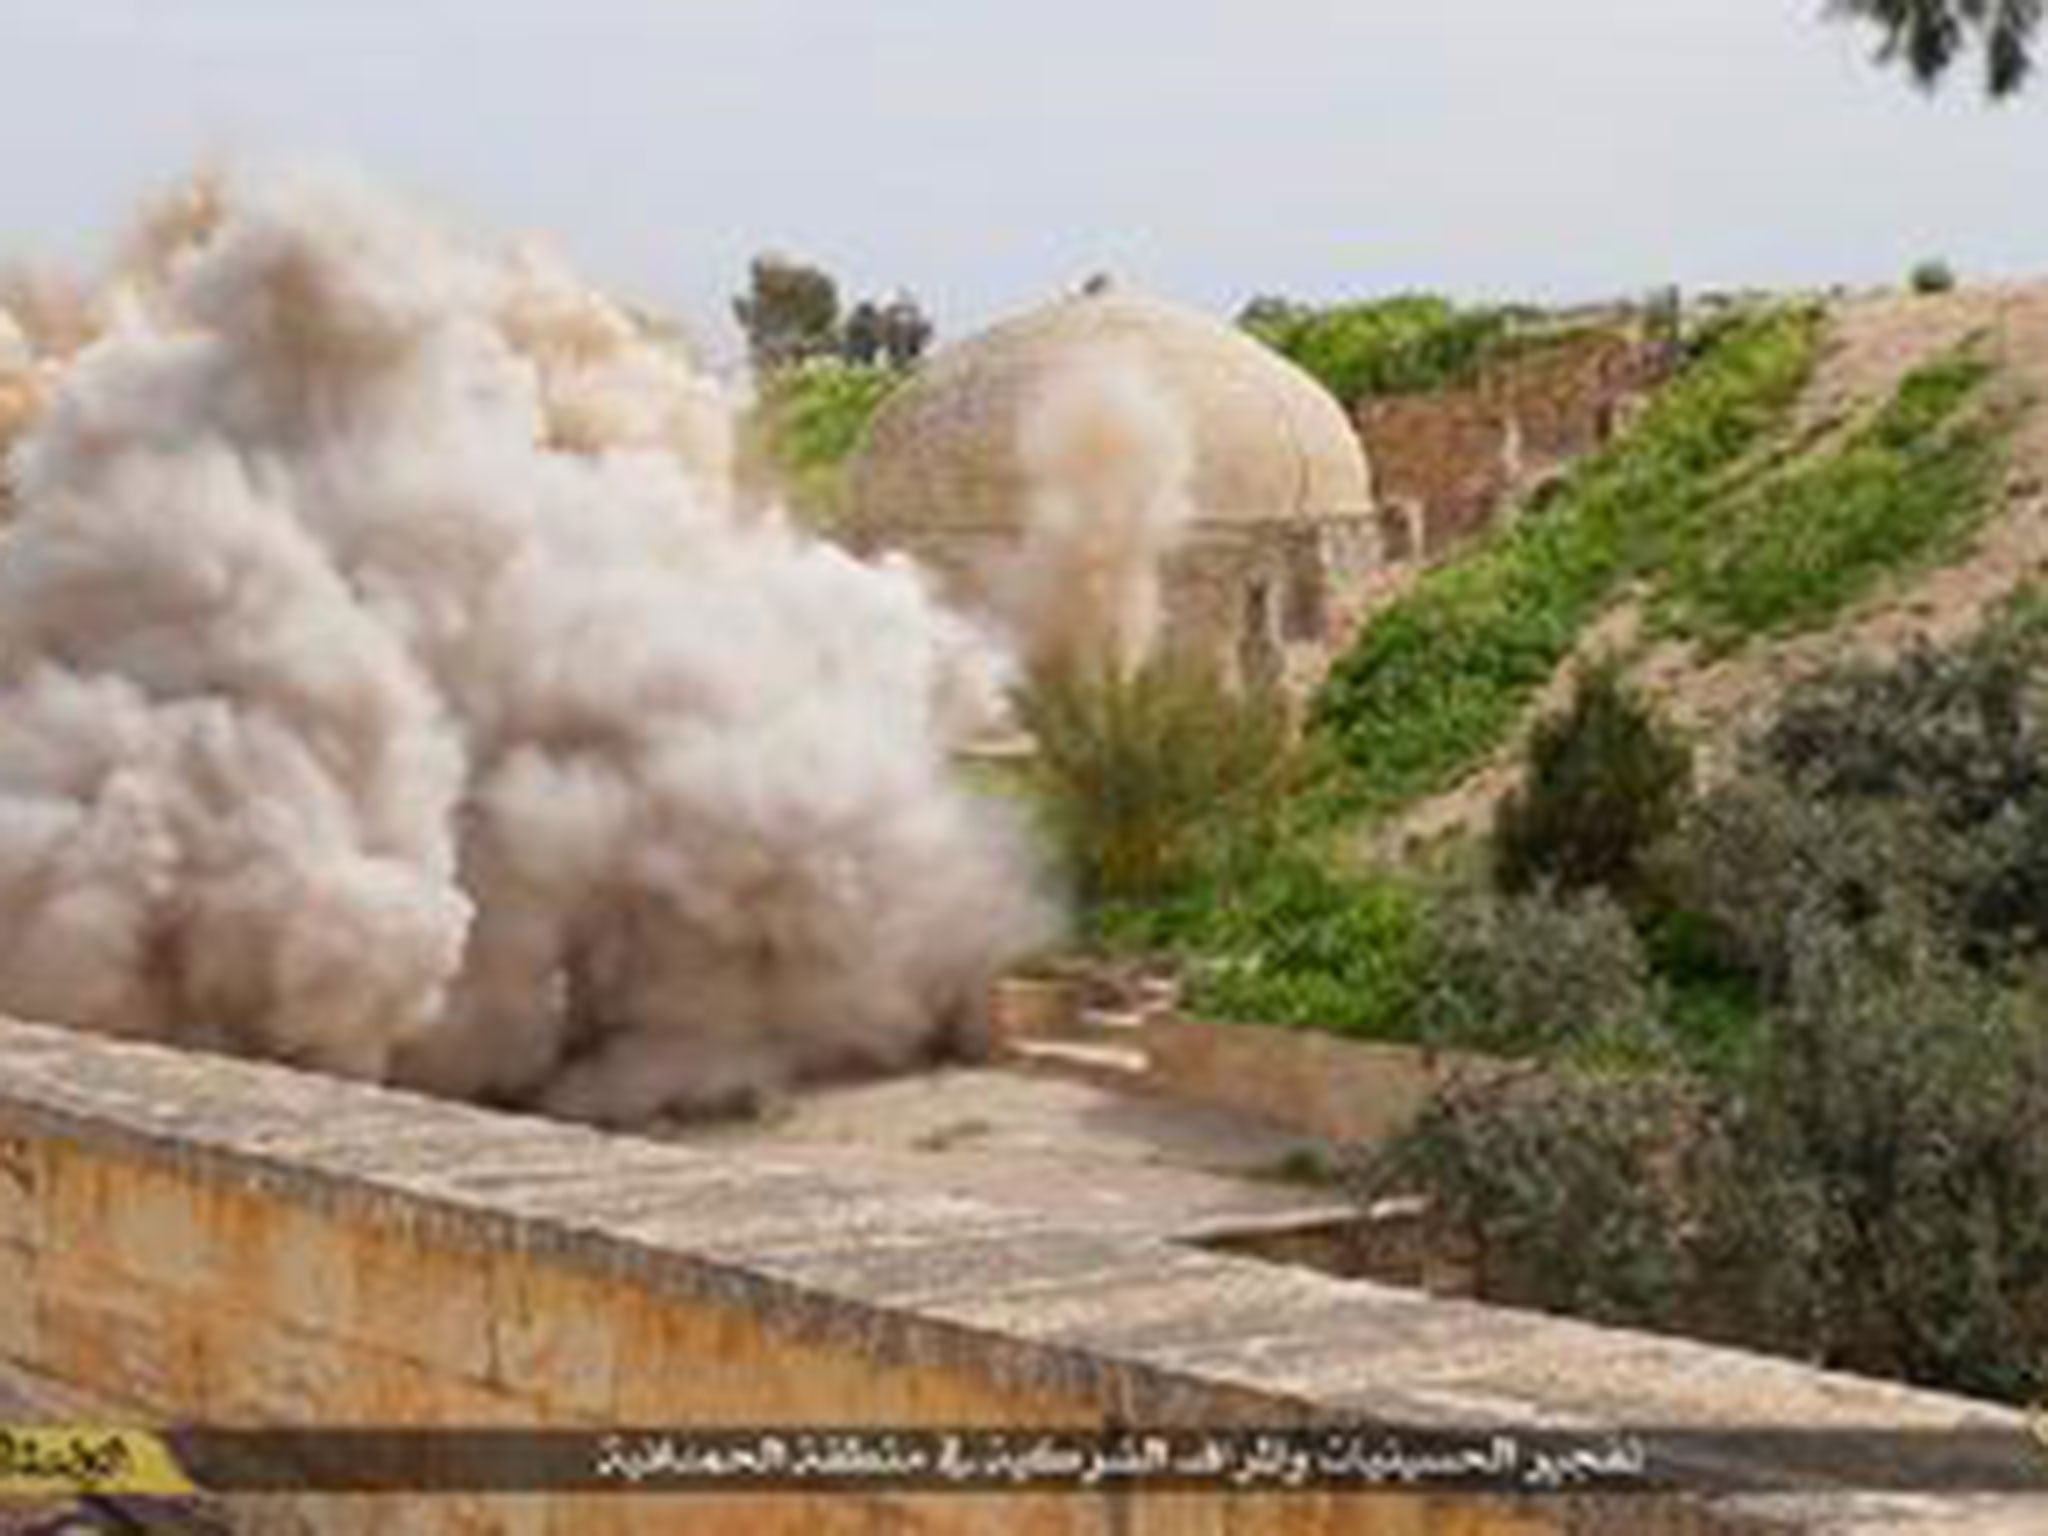 Isis accounts shared images of the monastery being blown up